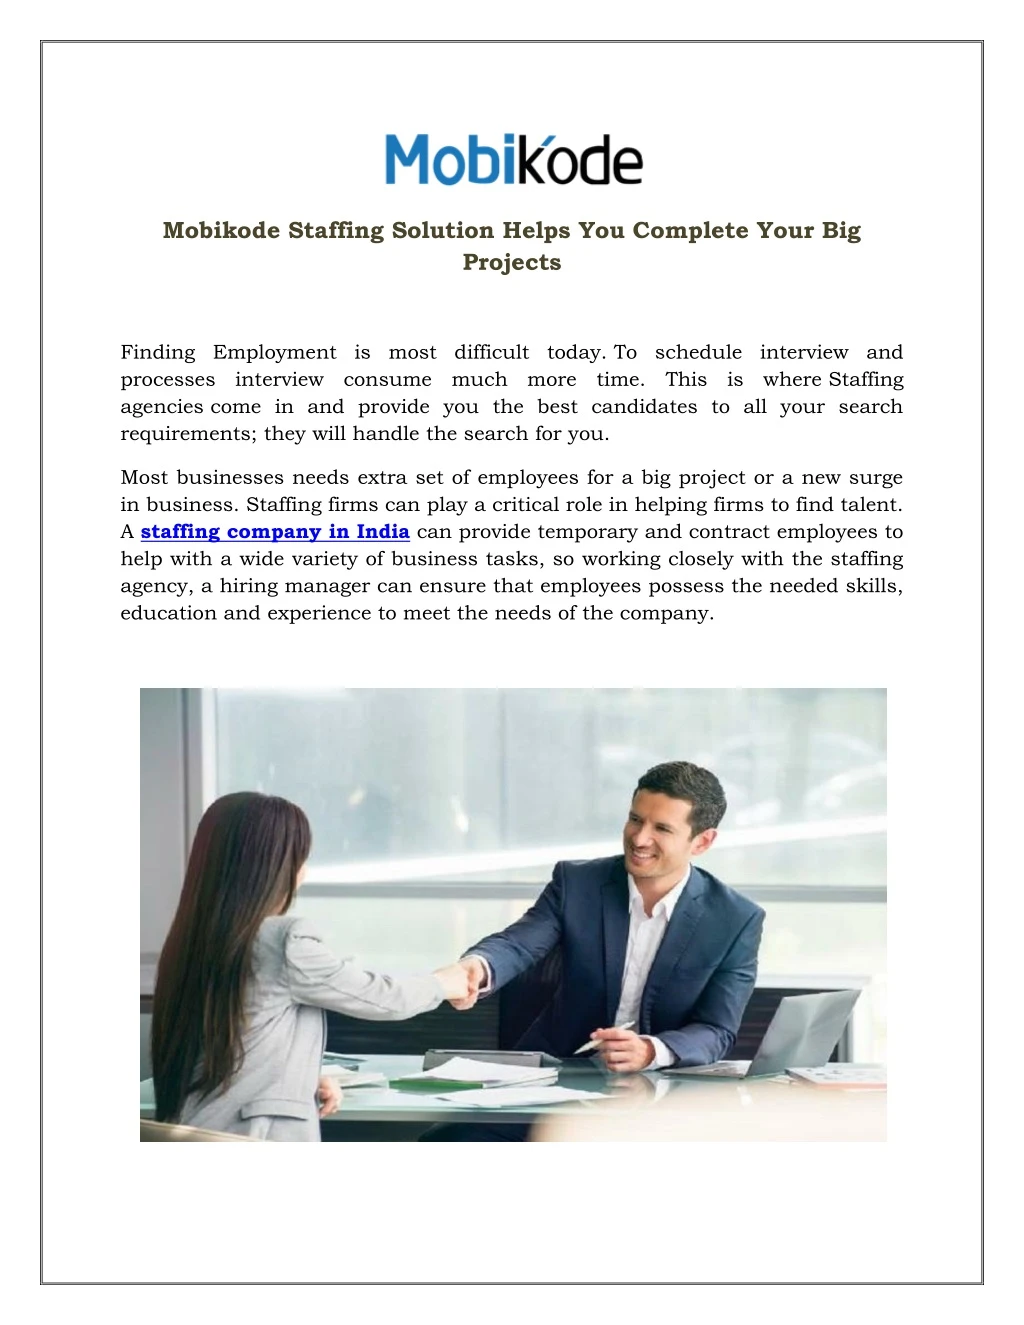 mobikode staffing solution helps you complete